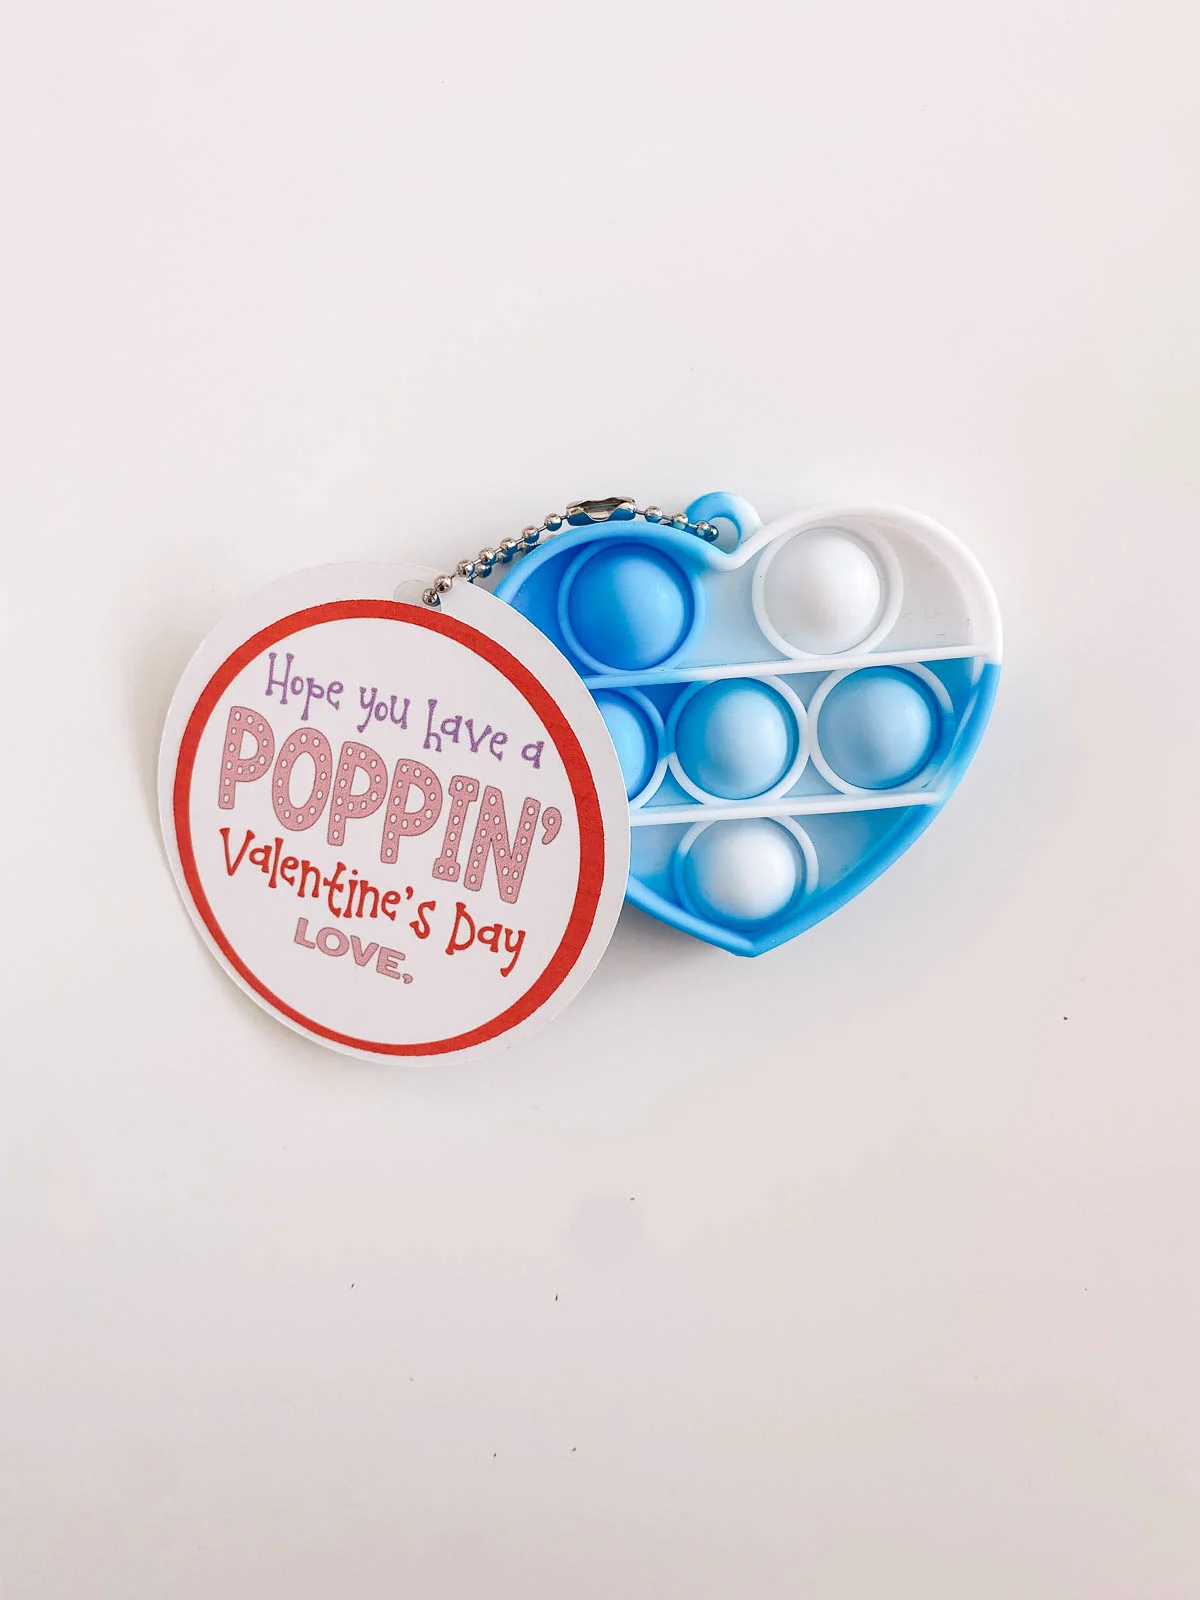 Heart-shaped pop fidget toy valentine with tag on a kitchen counter.